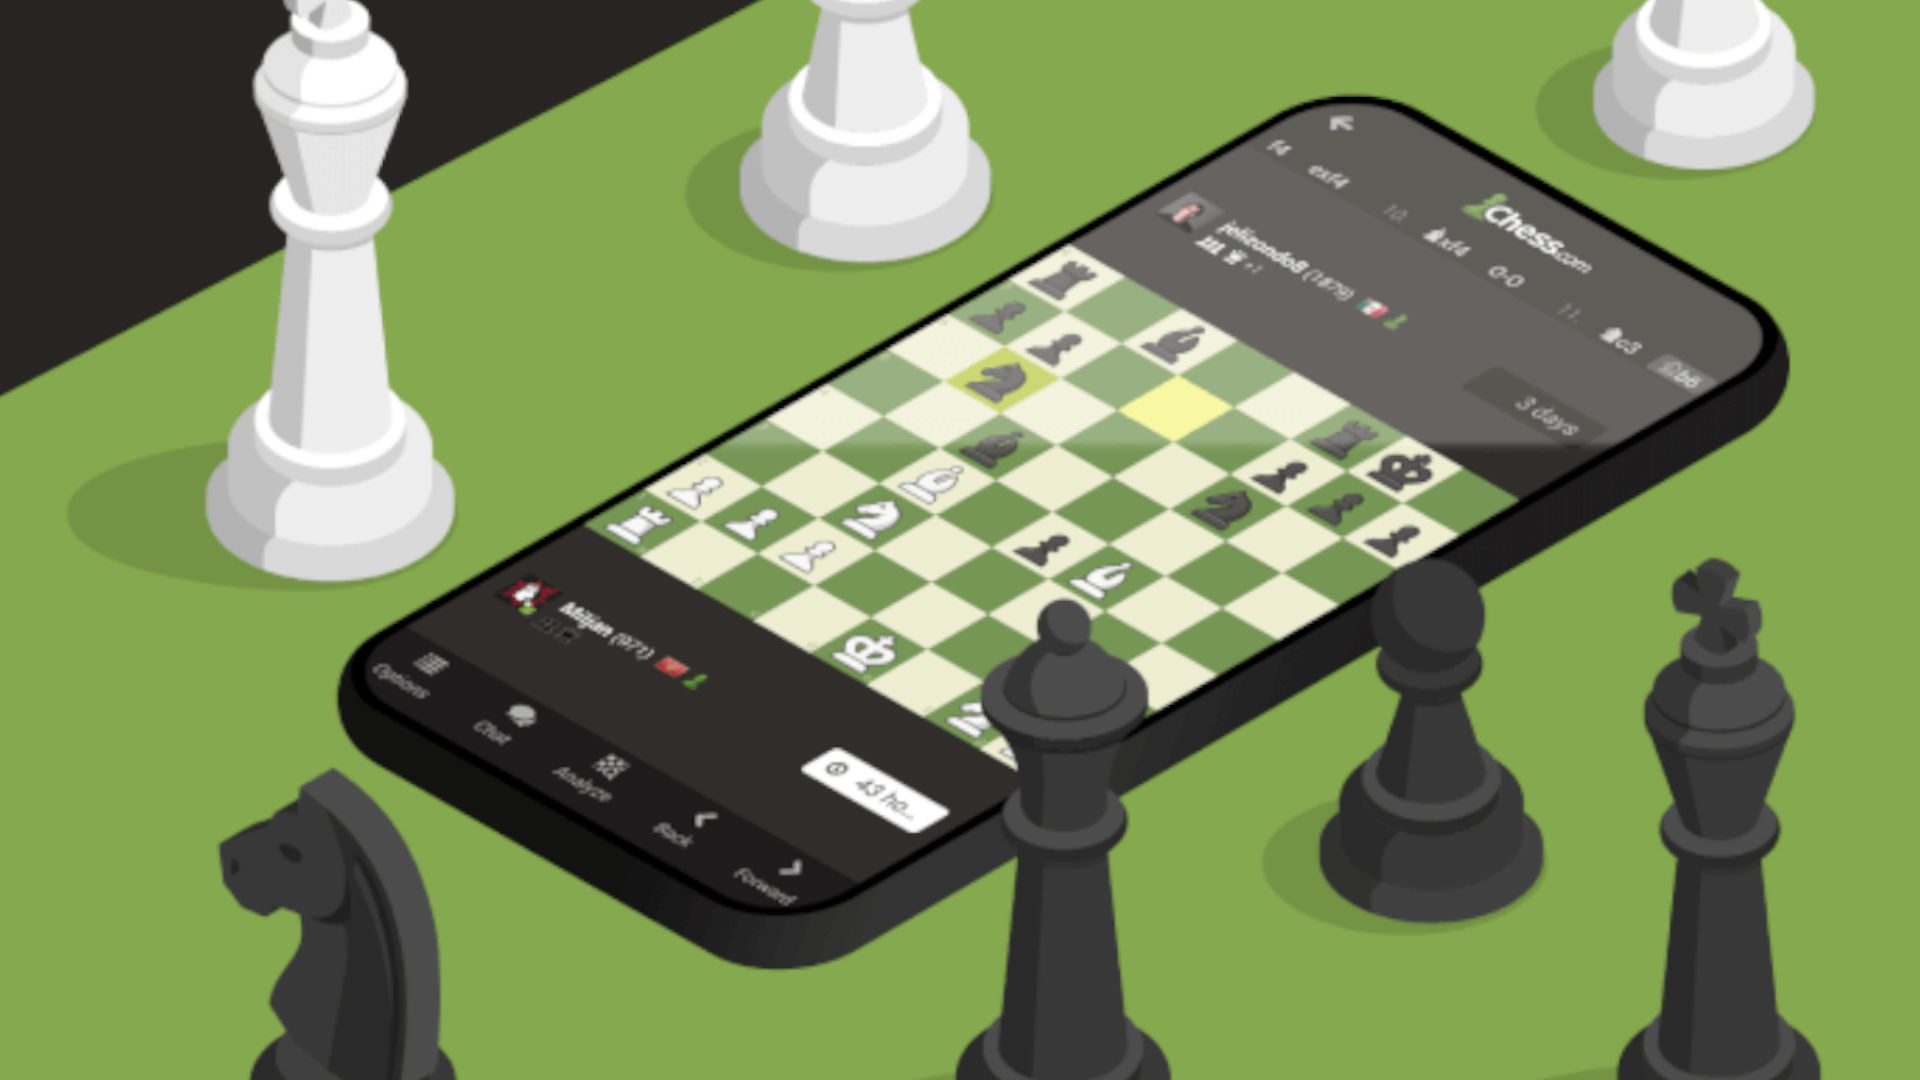 The Queen's Gambit Chess - Apps on Google Play